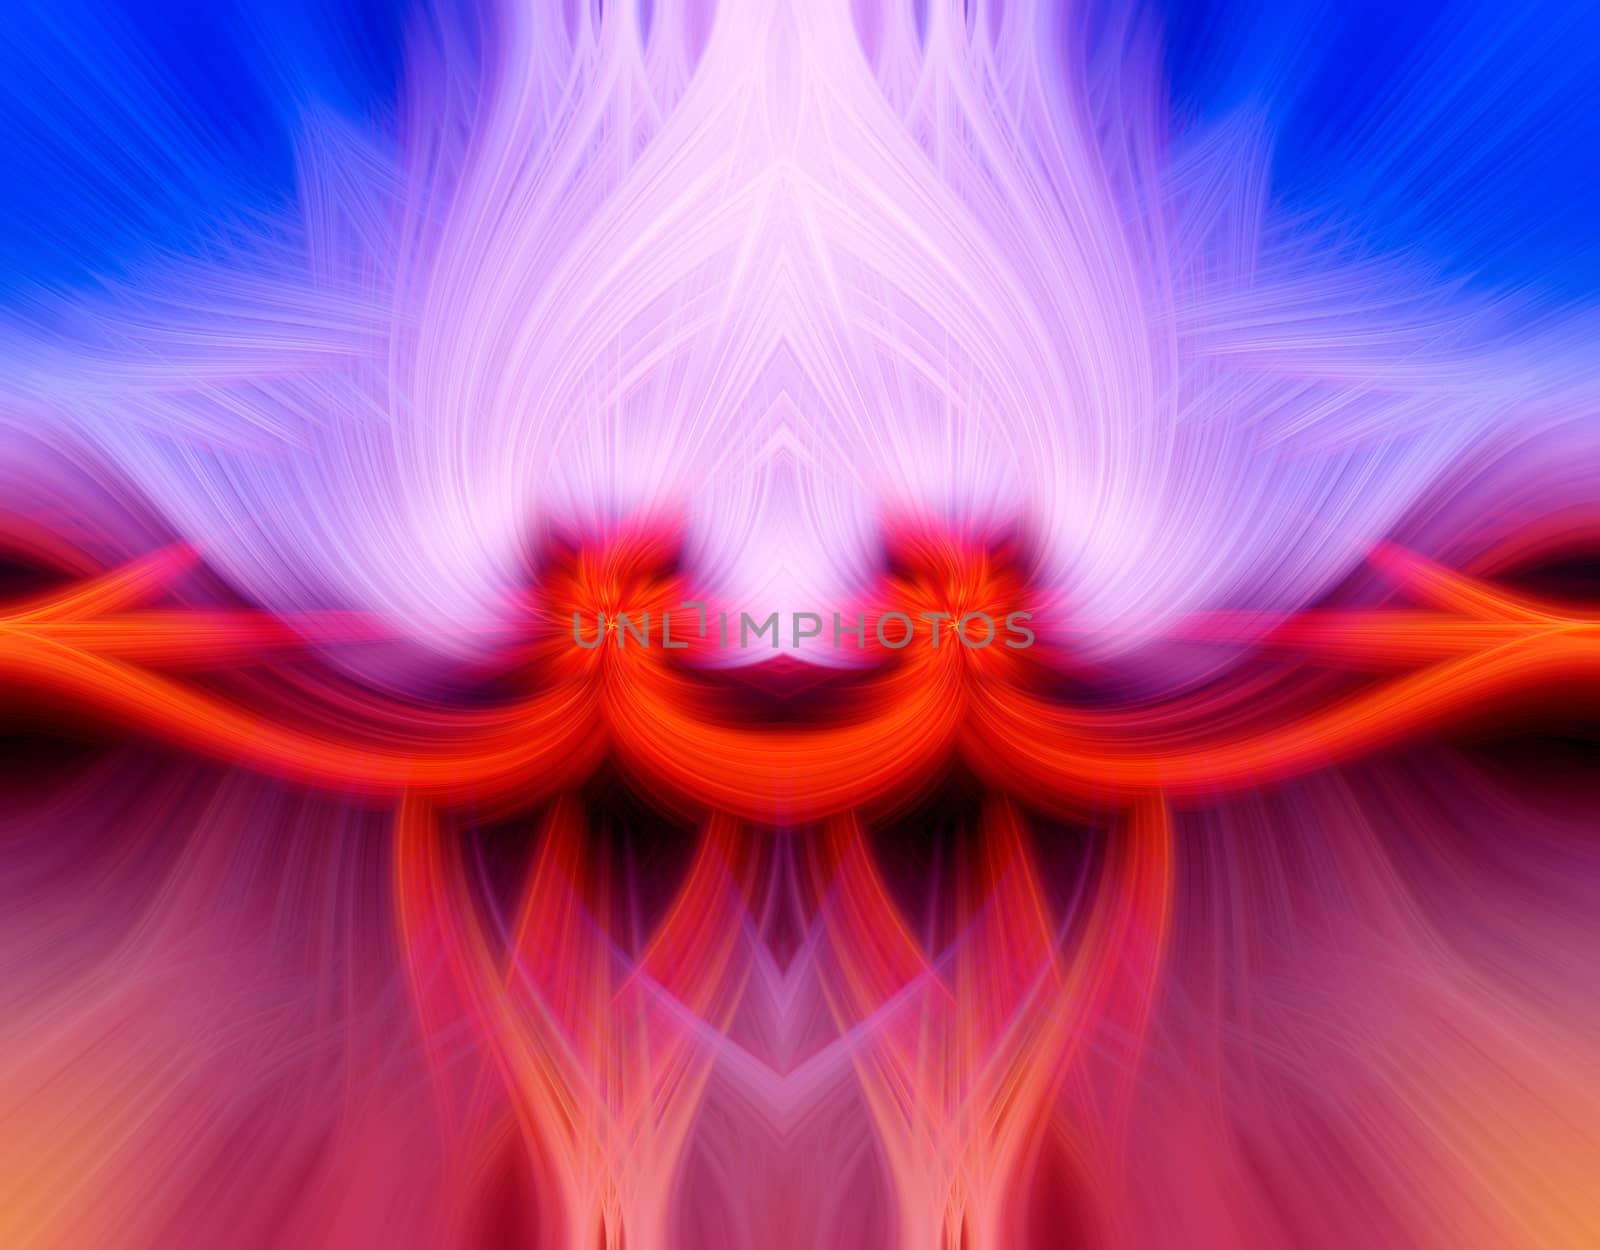 Beautiful abstract intertwined 3d fibers forming an ornament out of various symmetrical shapes. Shape of a white flame in the middle. Purple, pink, red, and blue colors. Illustration.